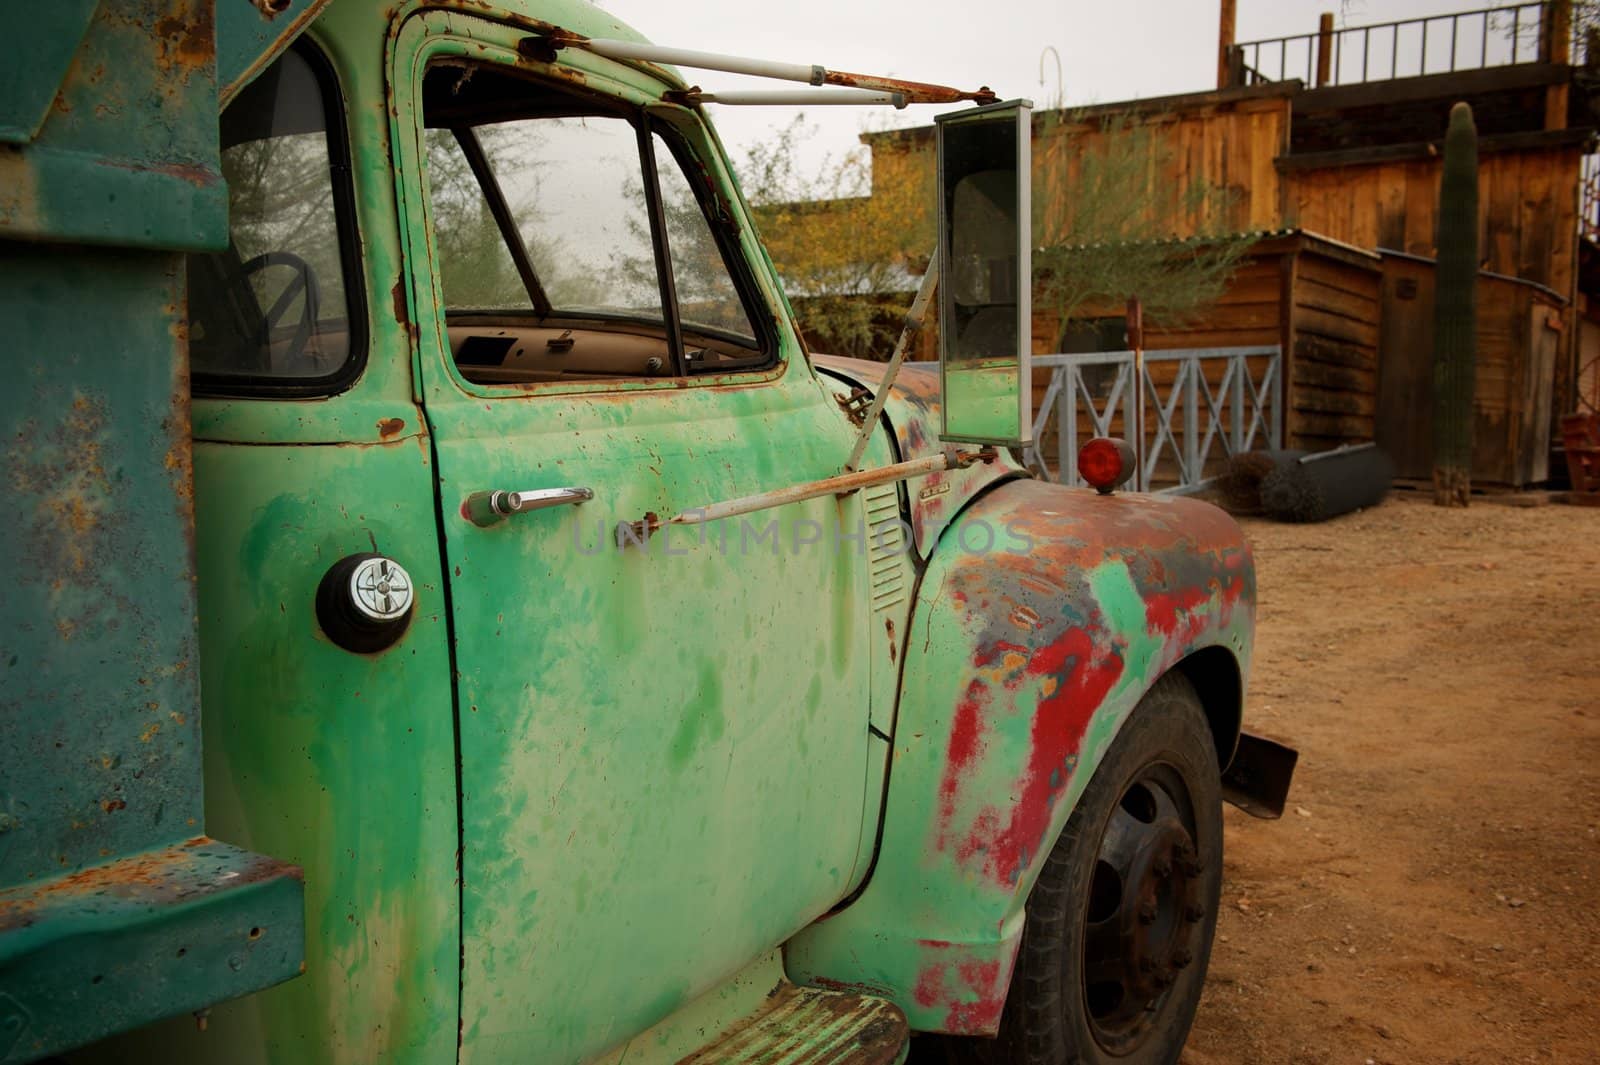 Rusty Old Truck with patches of green and red paint by pixelsnap